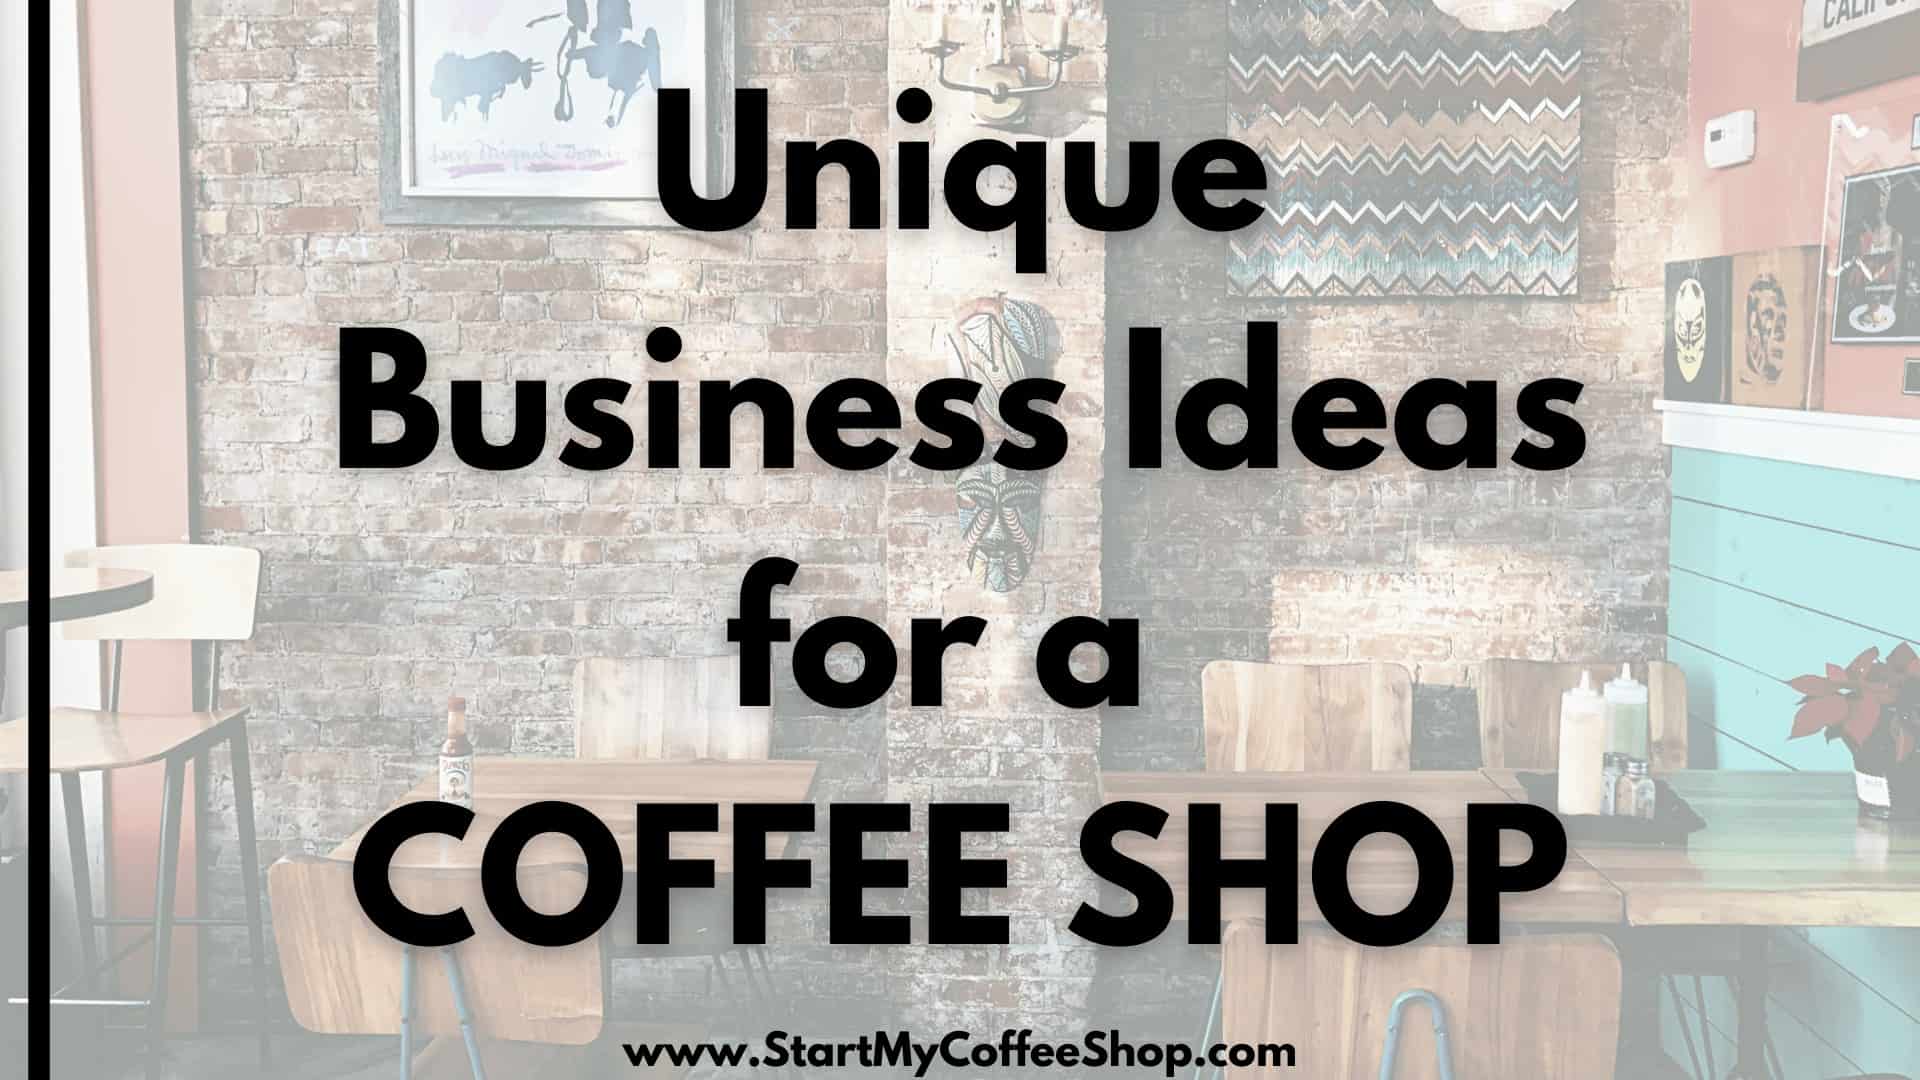 Unique Business Ideas for a Coffee Shop   Start My Coffee Shop